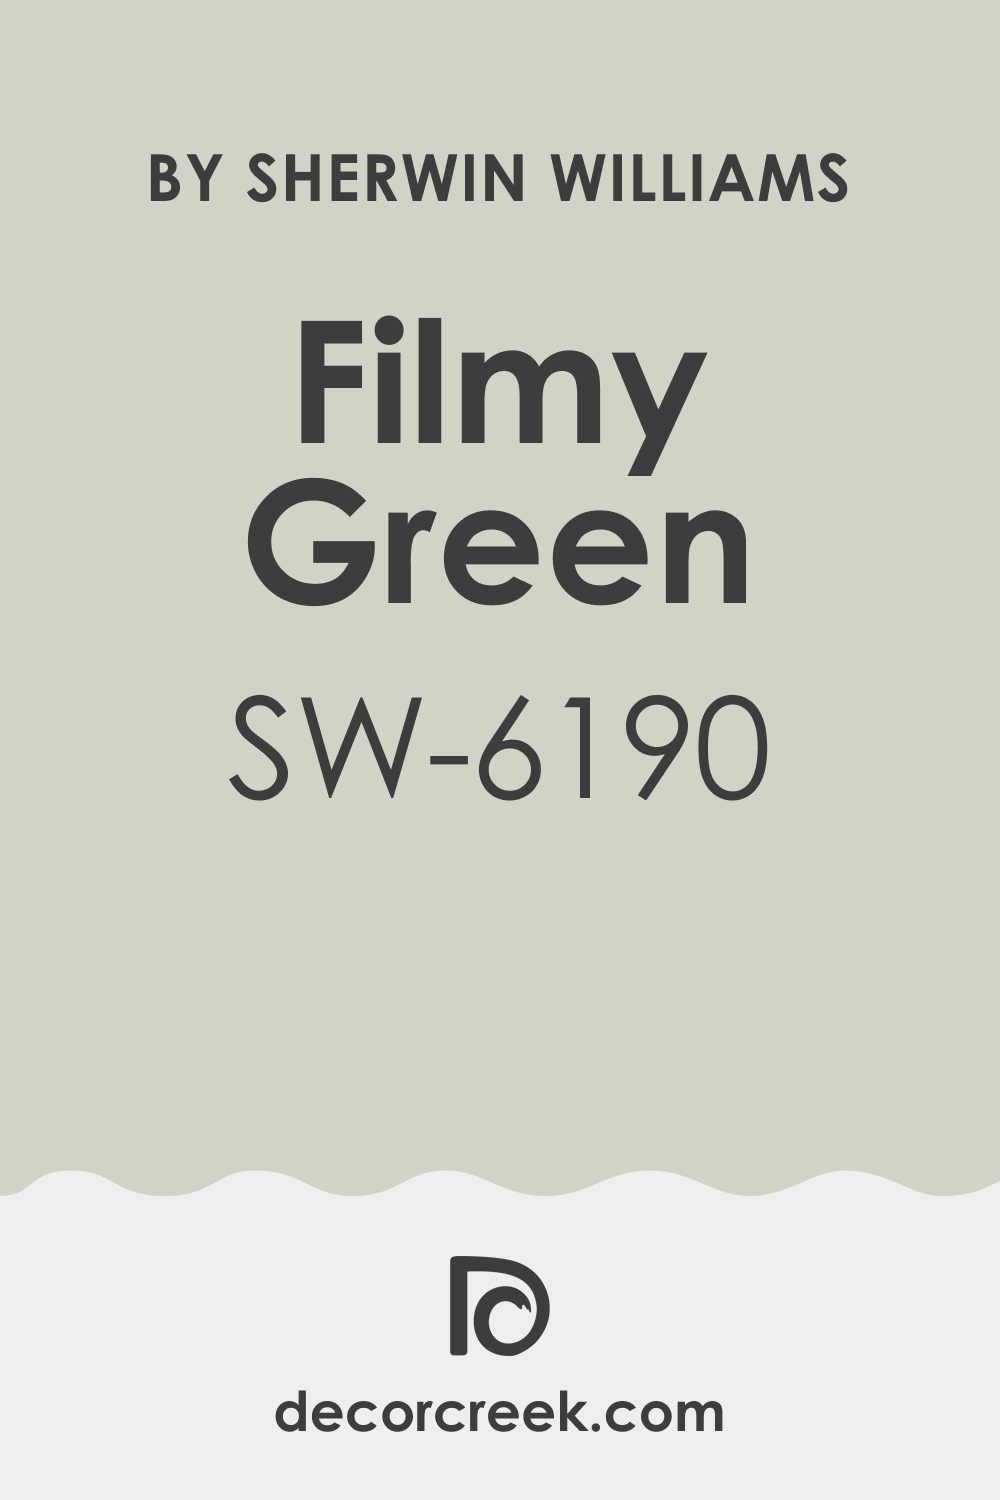 What Kind of Color Is Filmy Green SW 6190?